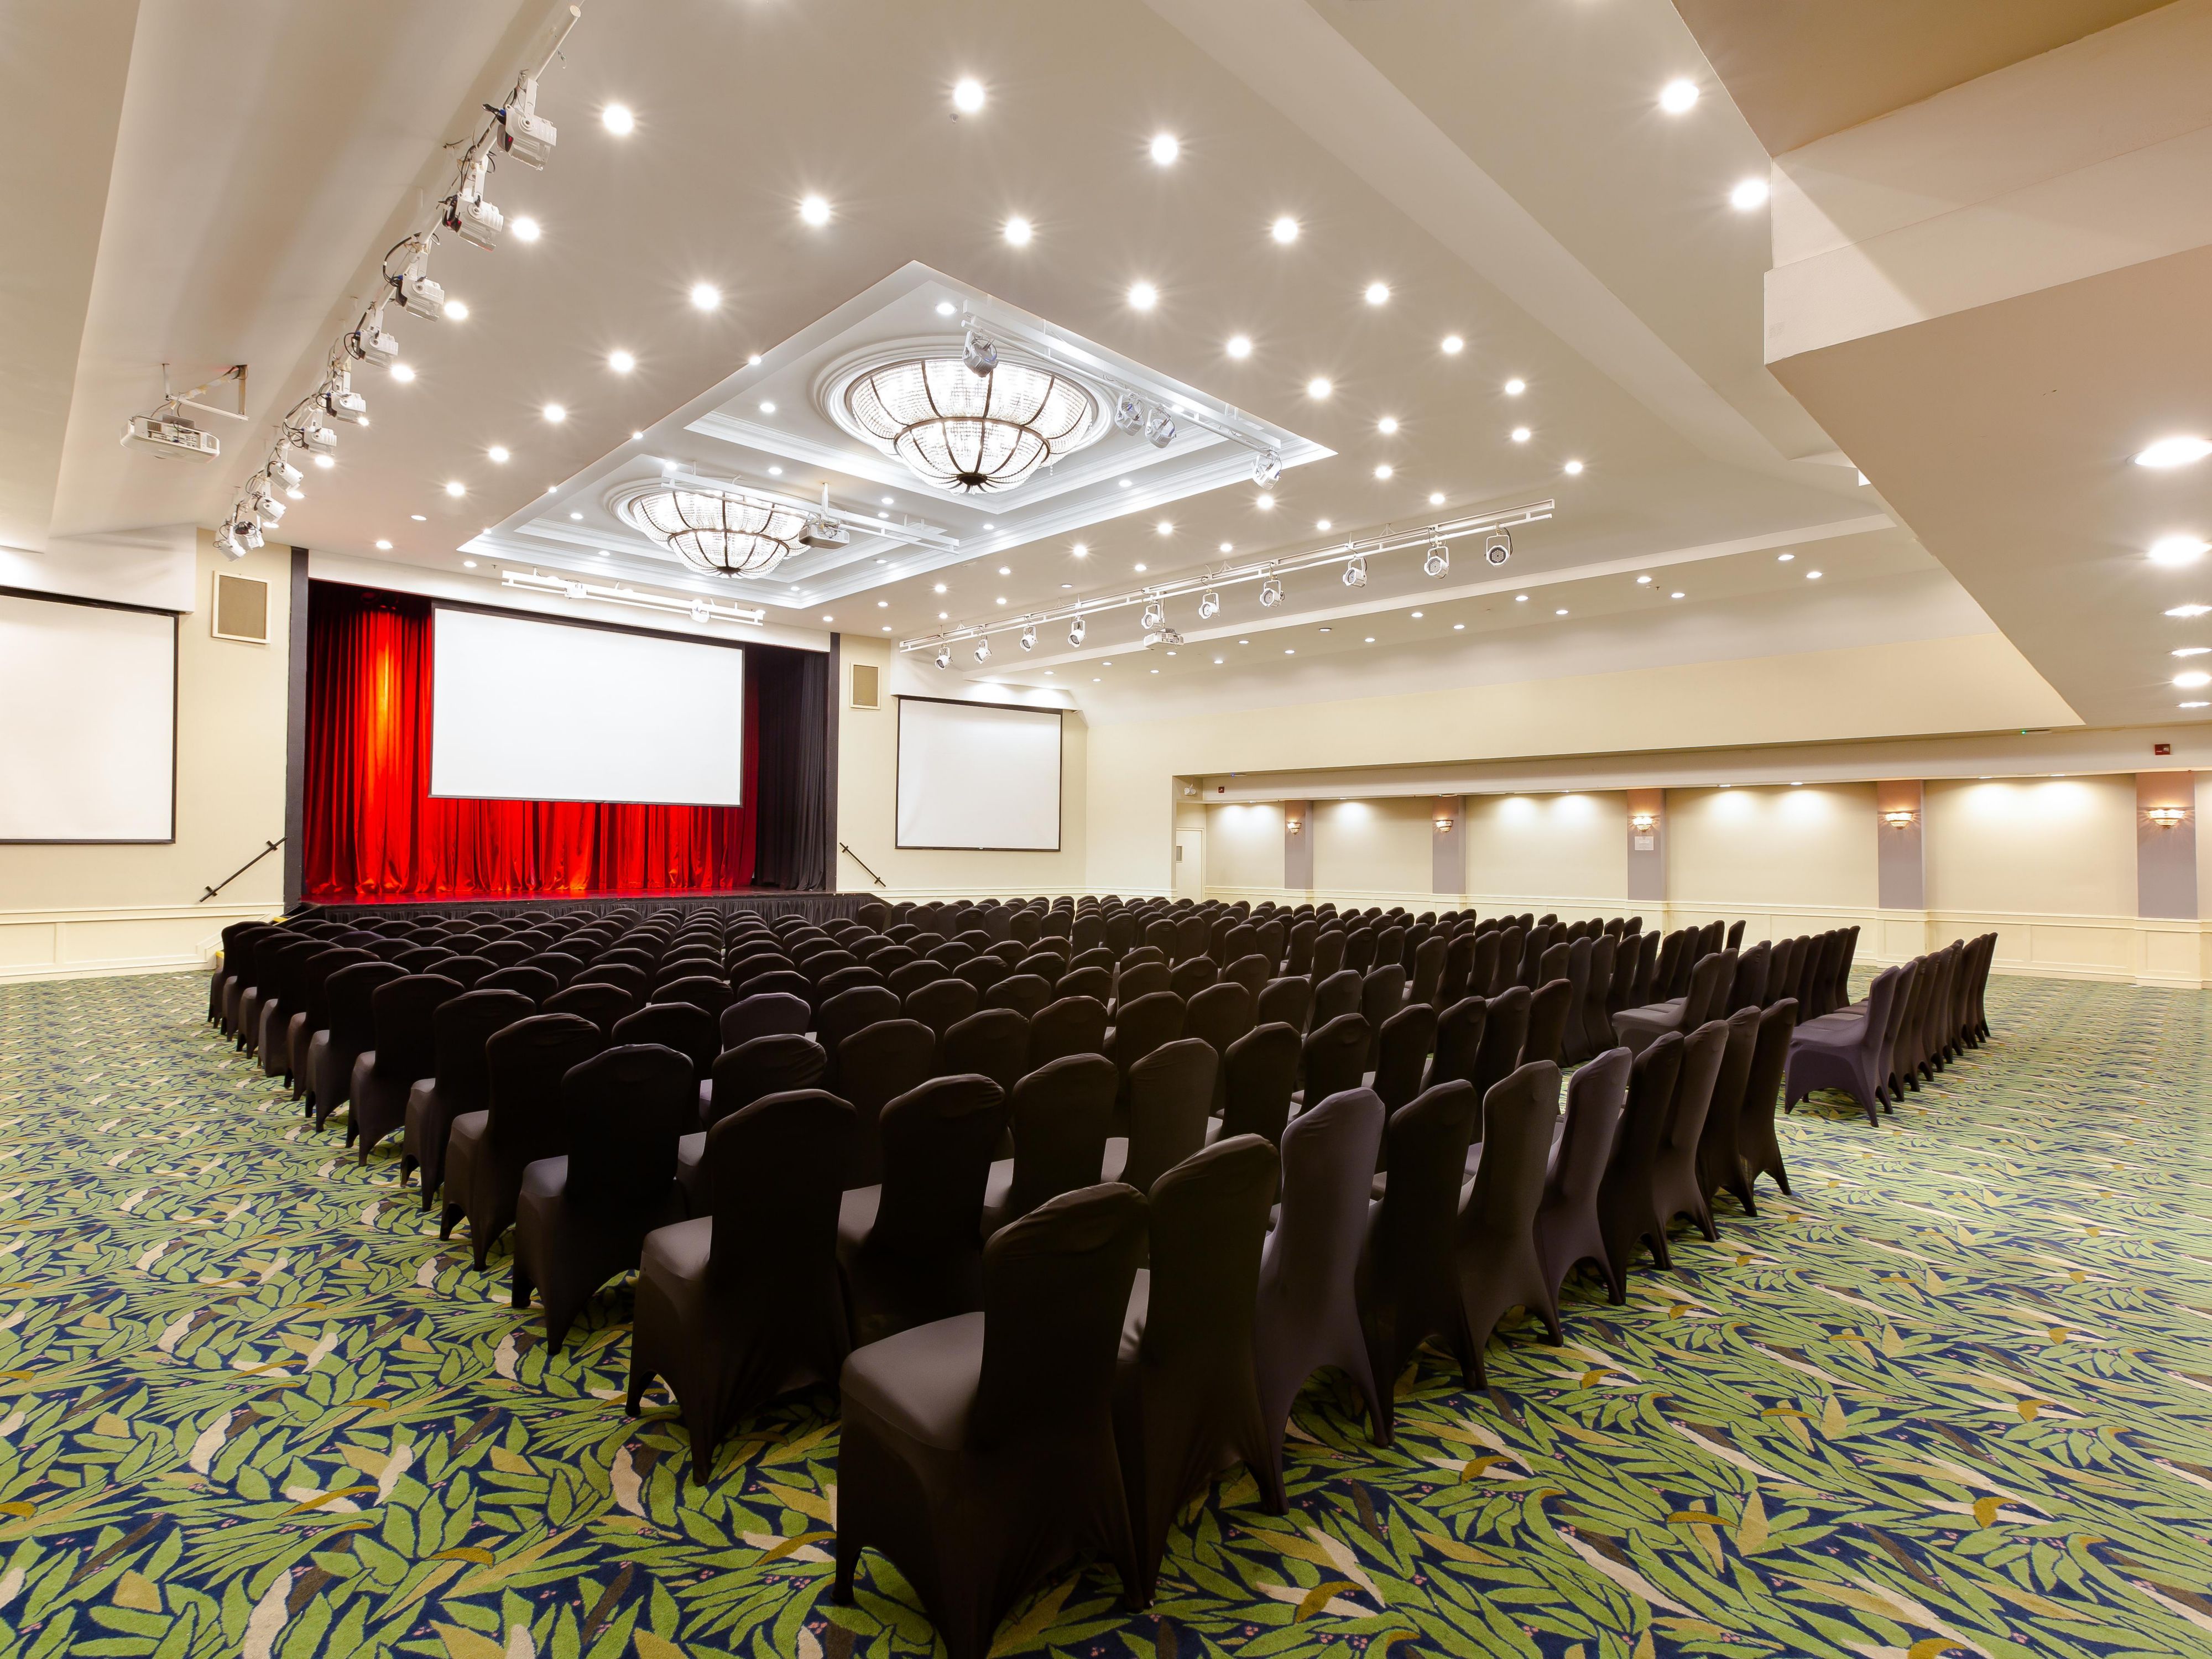 Our hotel has been completely transformed and is ready to impress your guests. With over 20,000 sq. ft. of flexible event space, we're committed to making your next meeting or conference a success. Our onsite Meeting Director will handle all the details, including world-class technology and personalized menus.